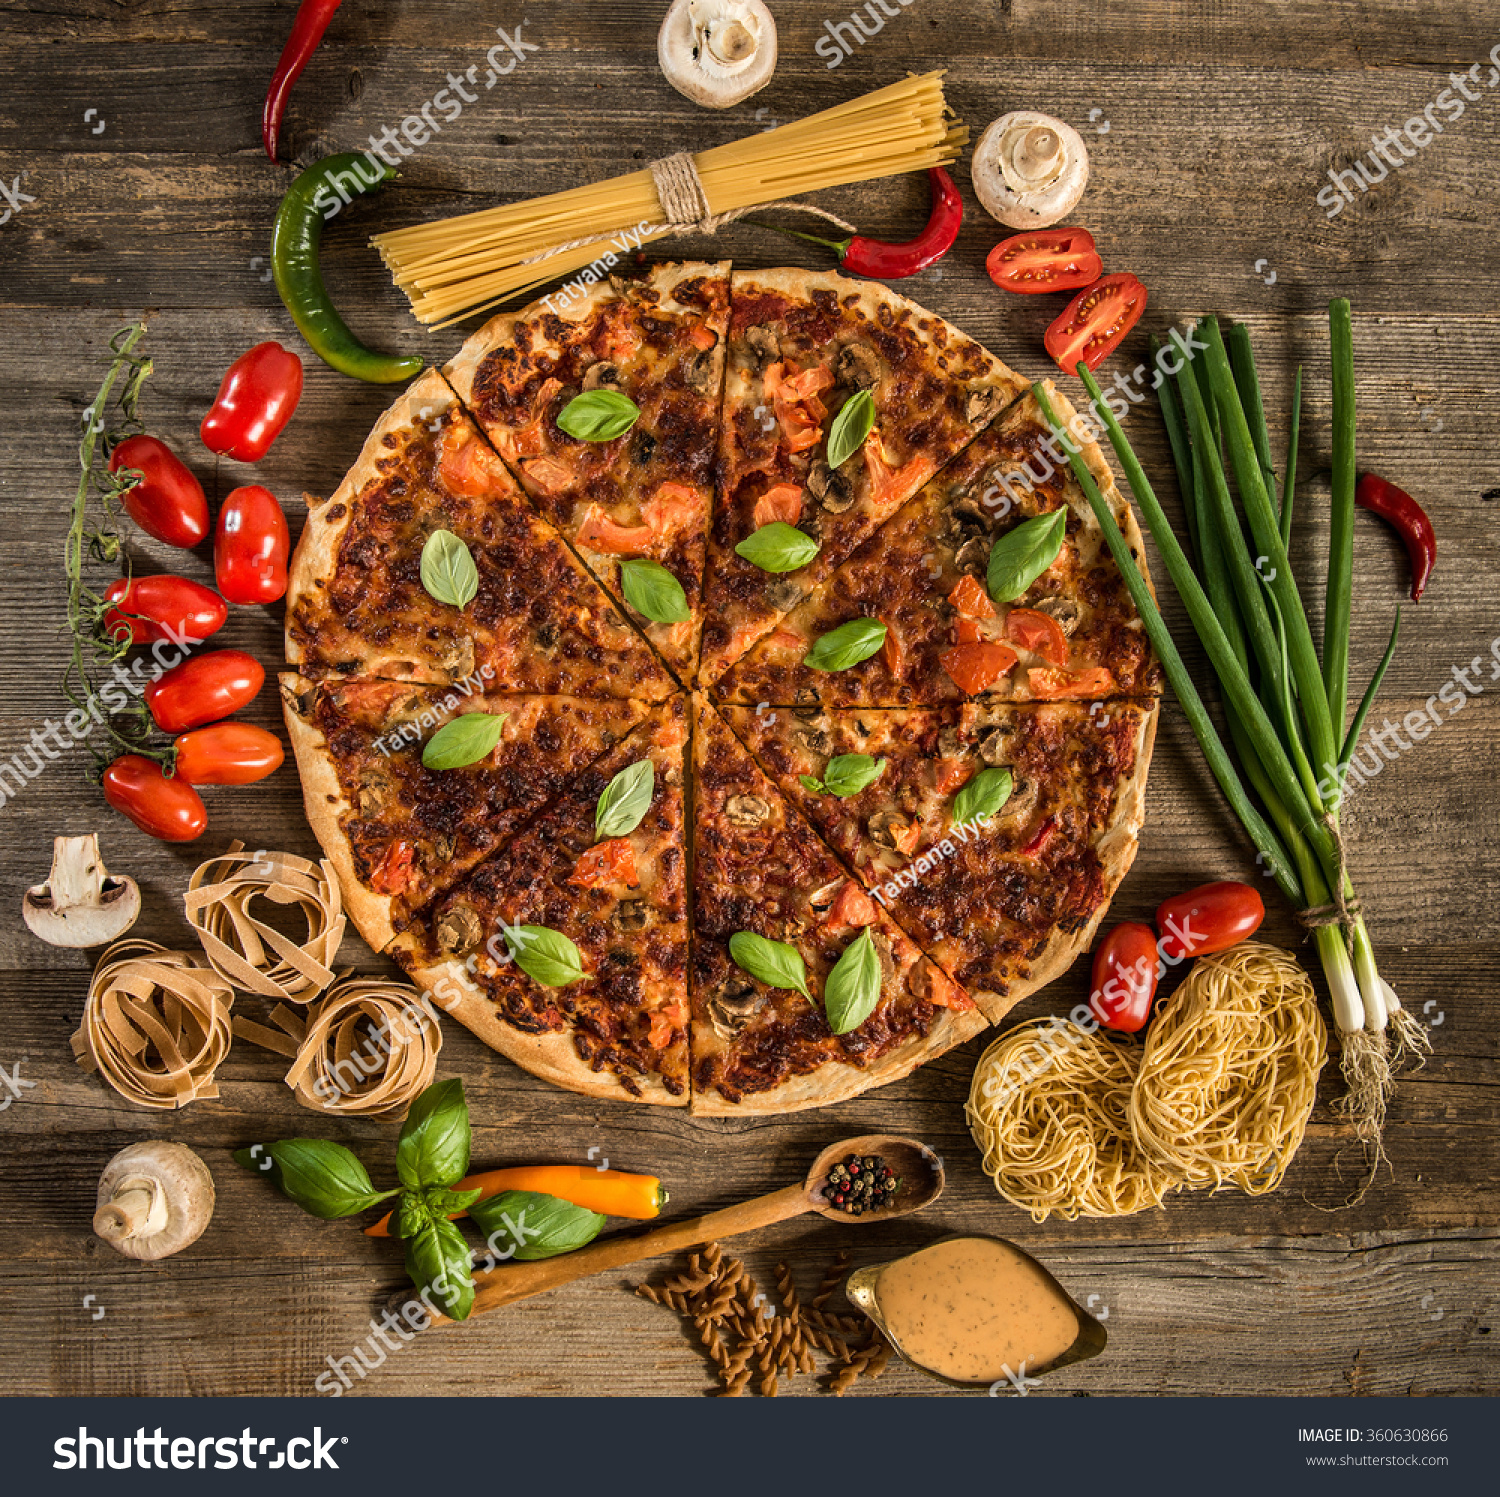 Royalty-free Italian food background with pizza, raw… #360630866 ...